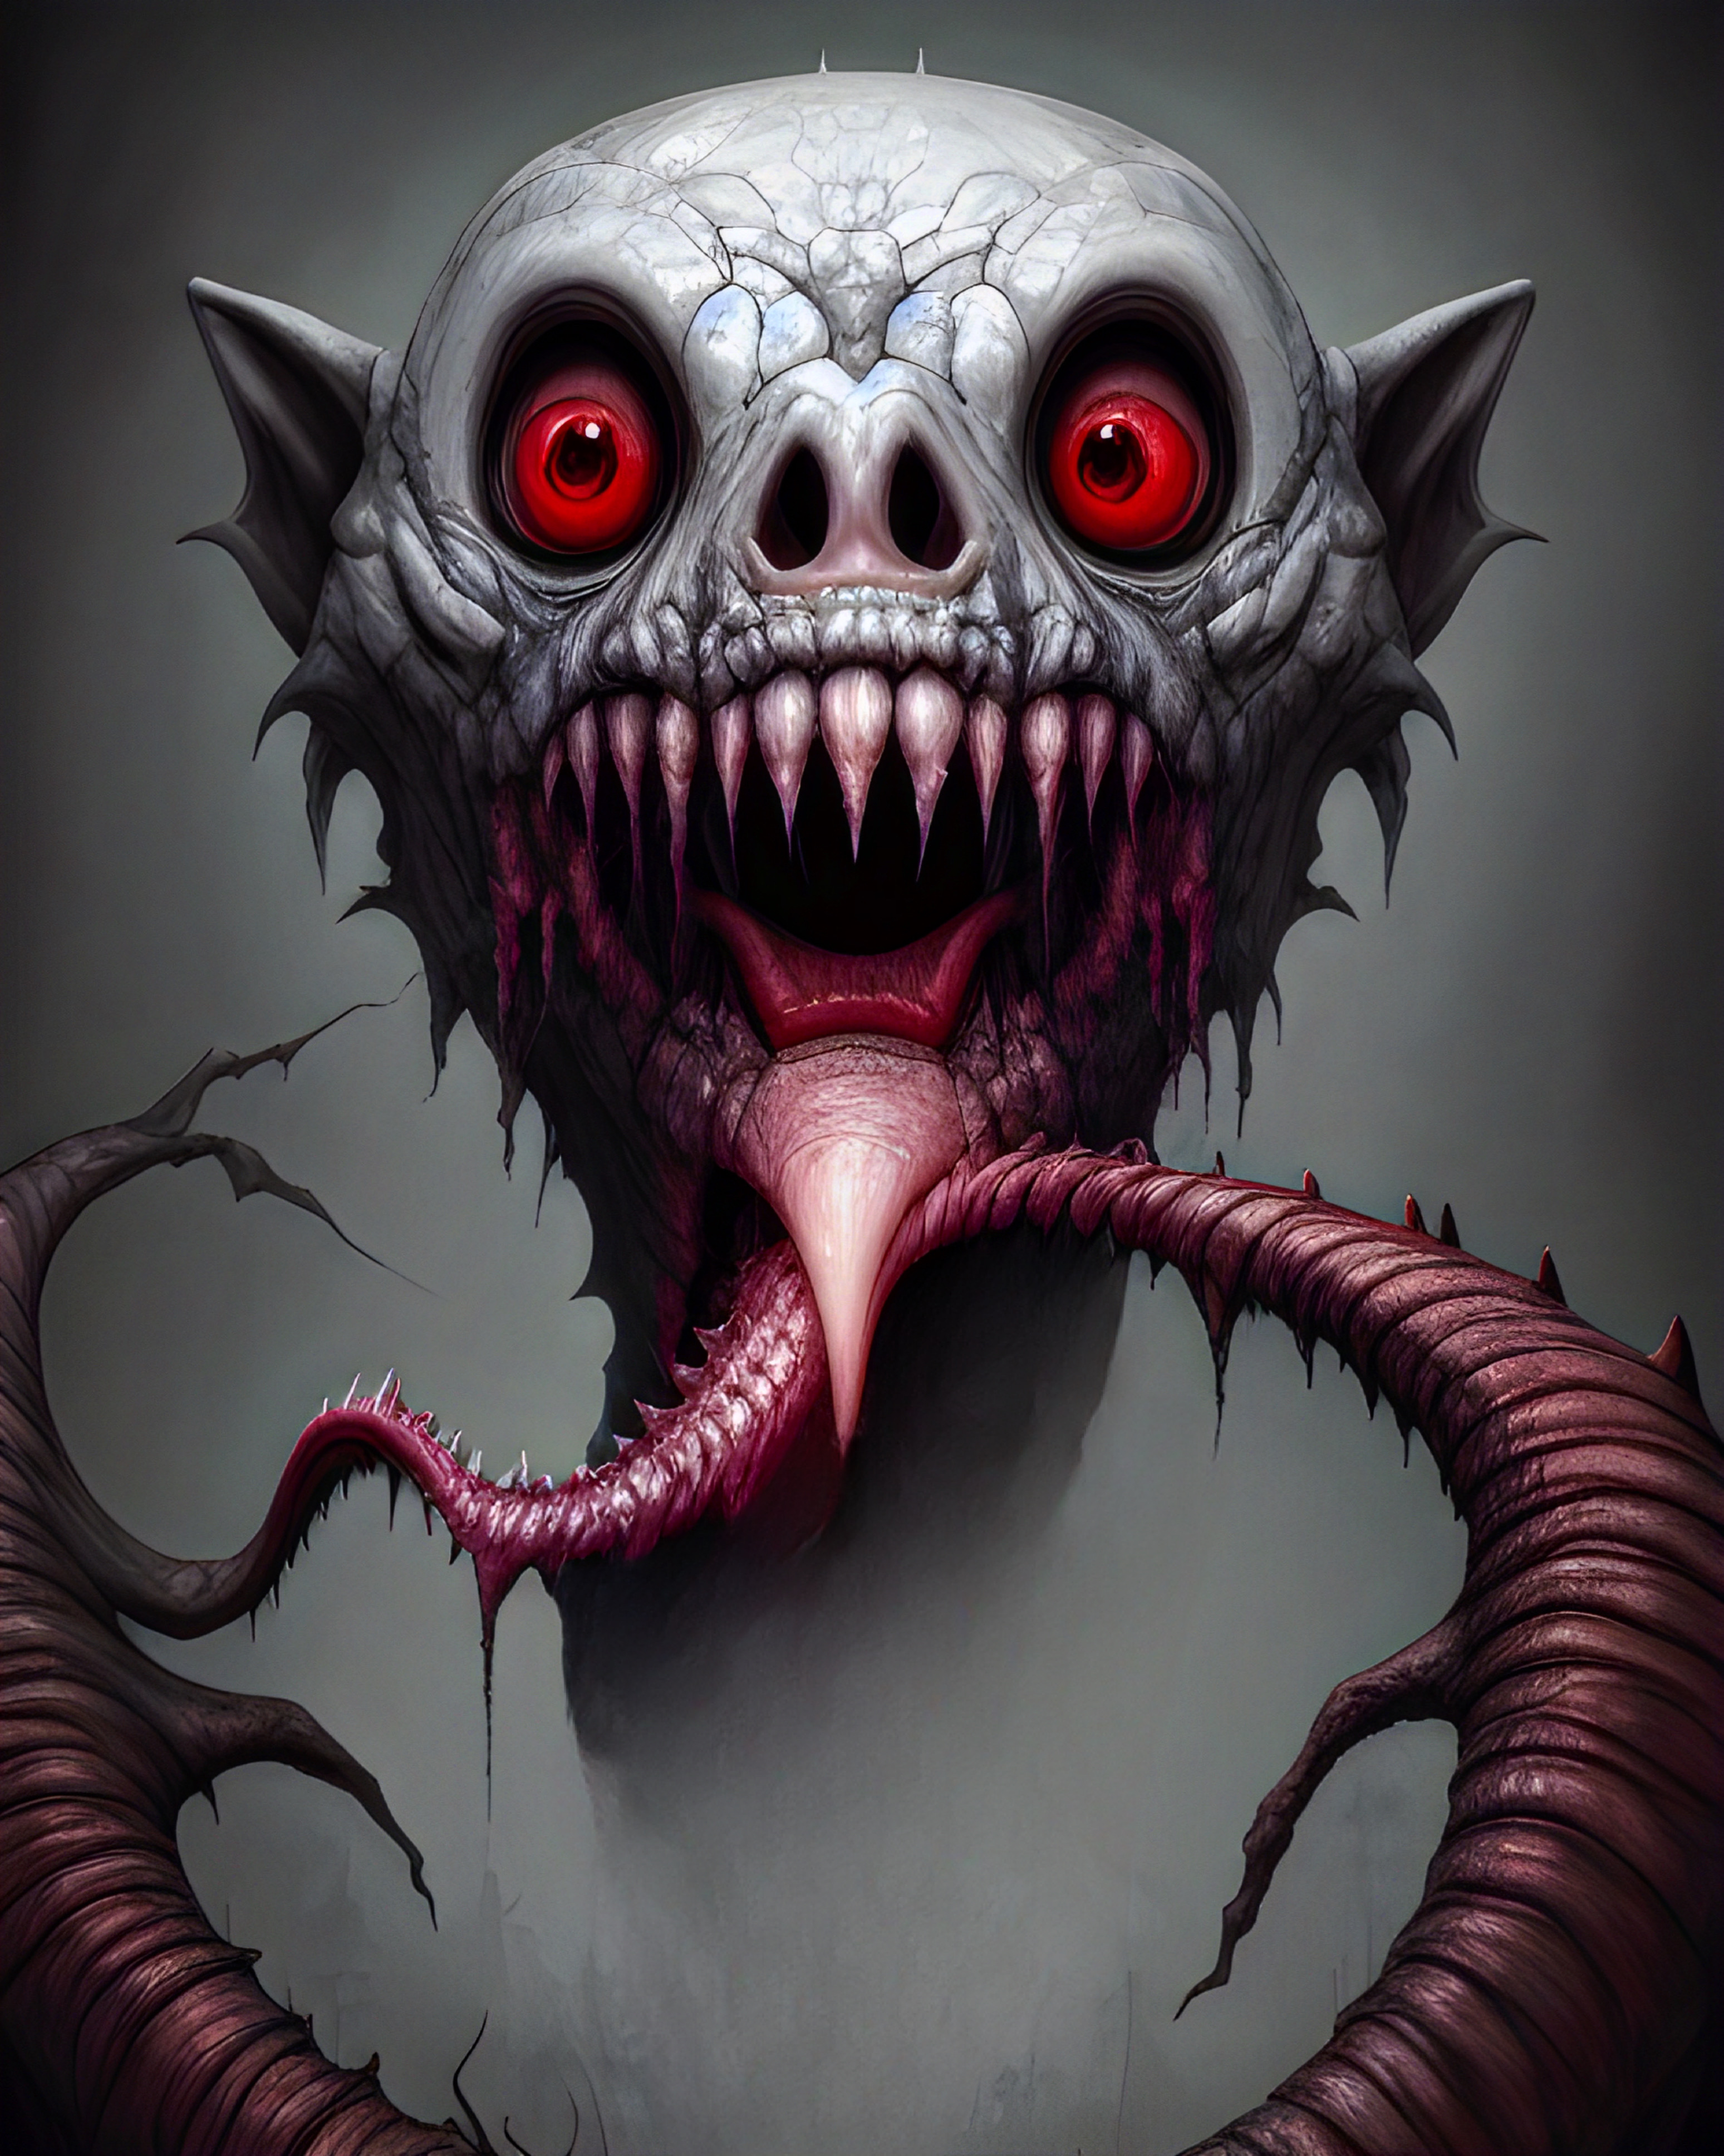 Scary face by dawit1core on DeviantArt